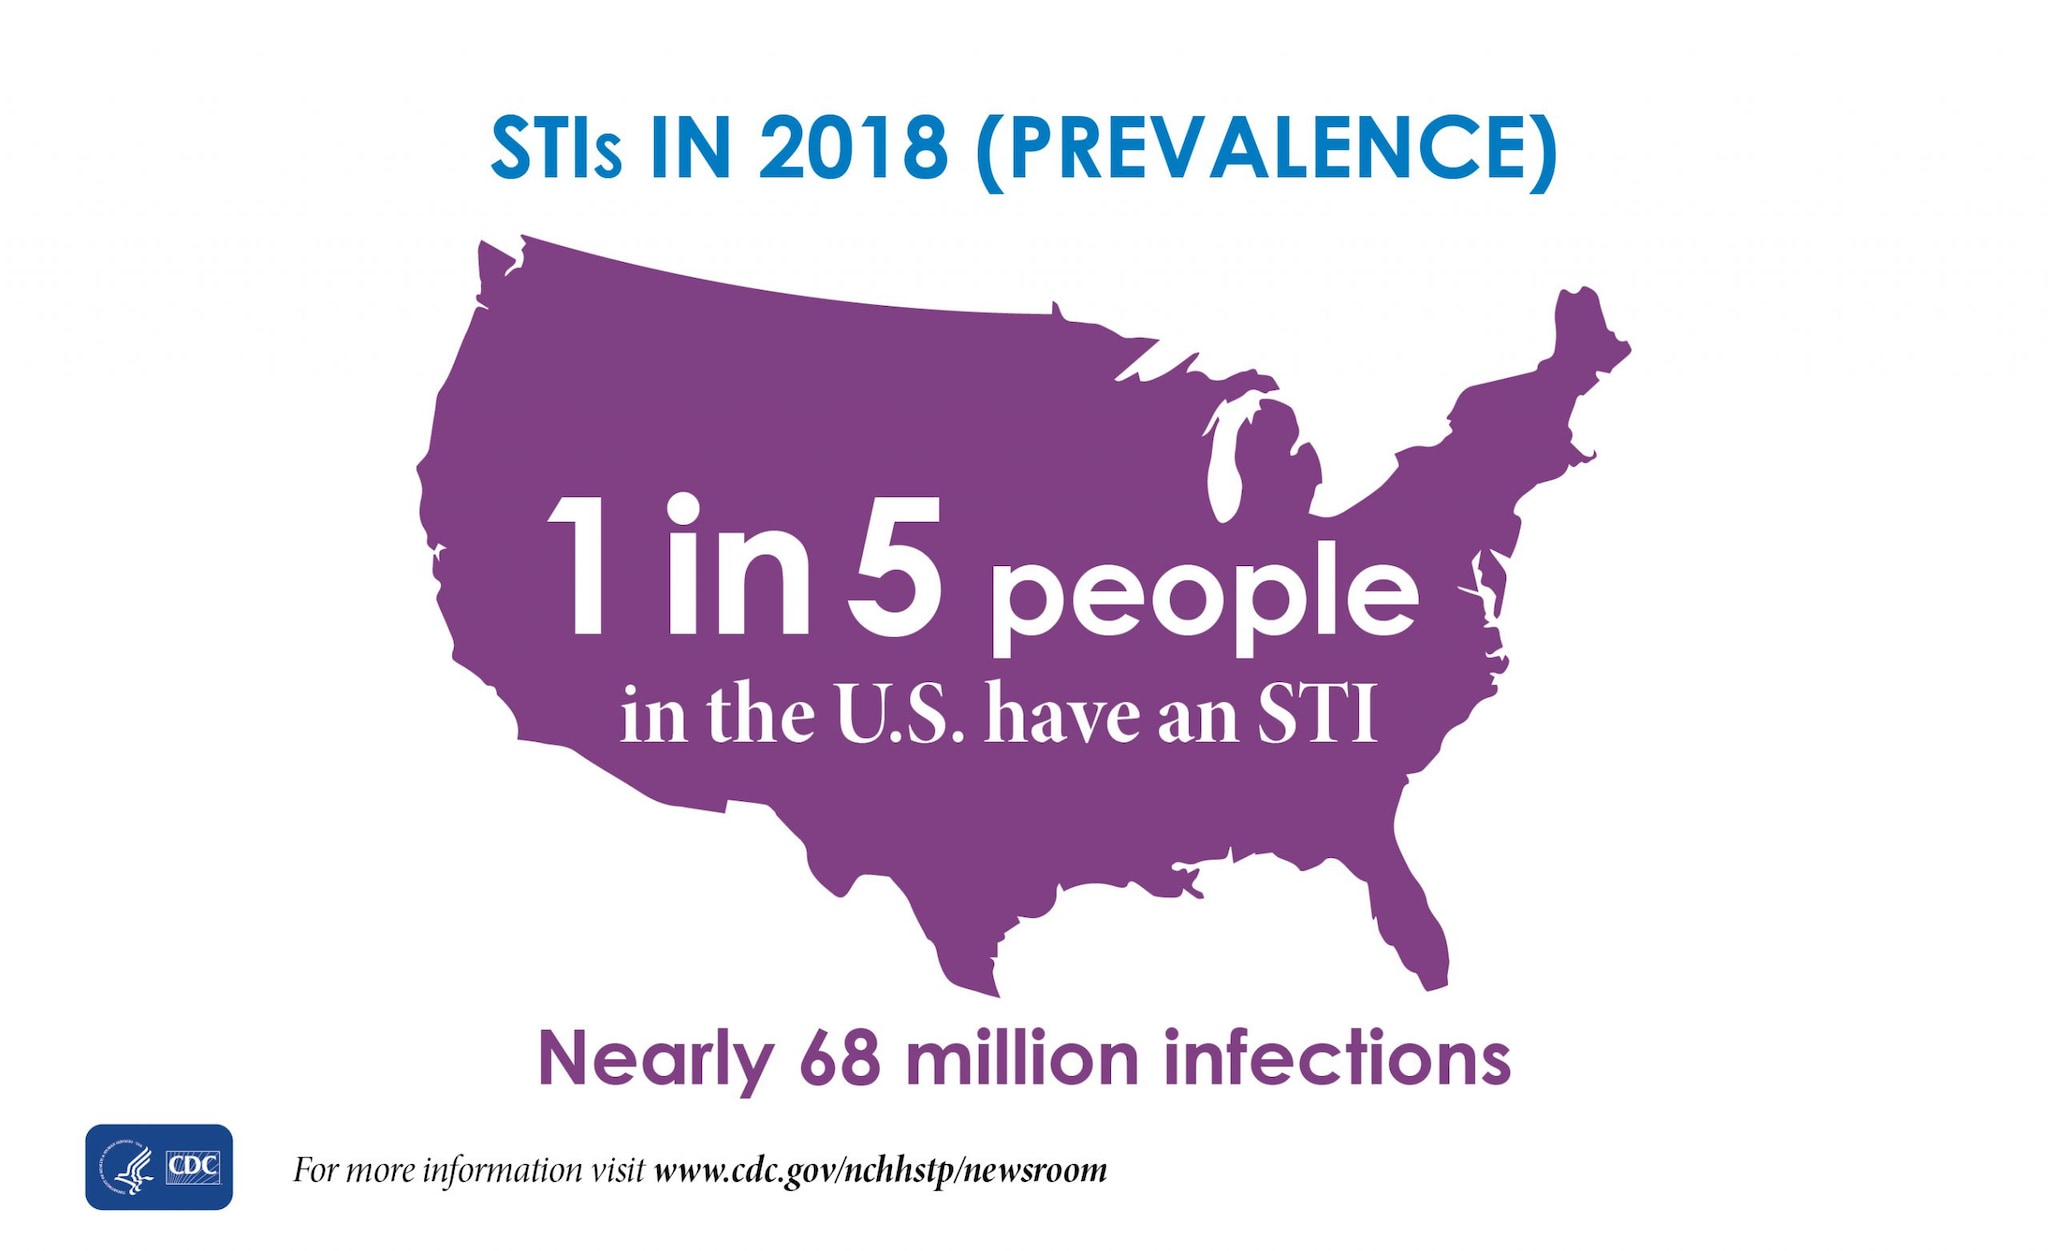 The graphic shows there were nearly 68 million infections in 2018 (prevalence), and that 1 in 5 people in the U.S. have an STI.